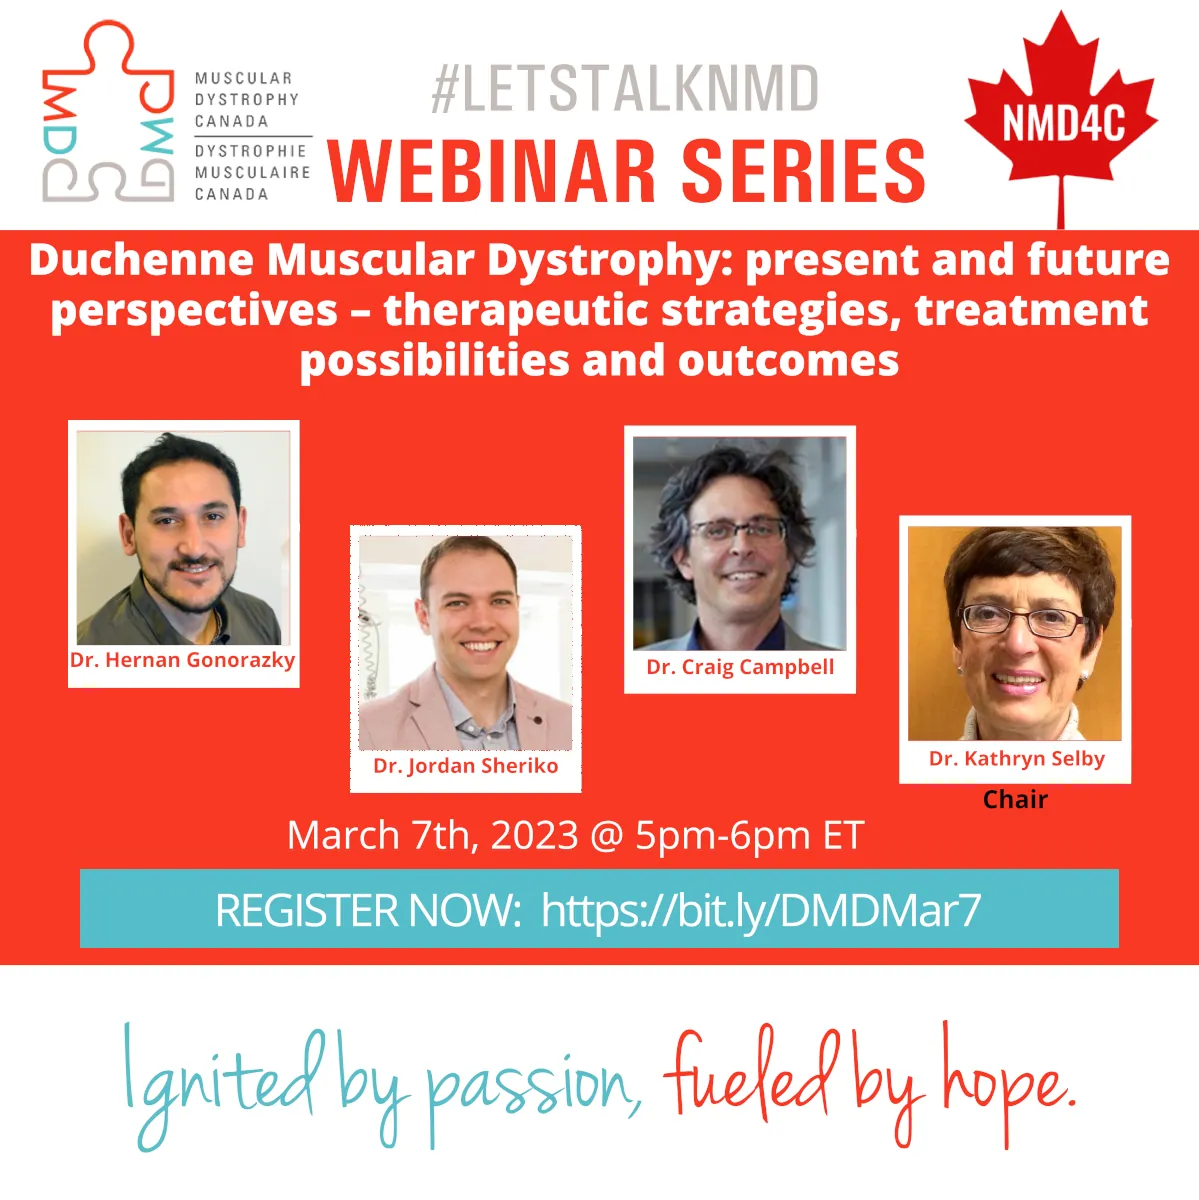 Poster for webinar on March 7th on Duchenne Muscular Dystrophy. Pictures of the four presenters with text.